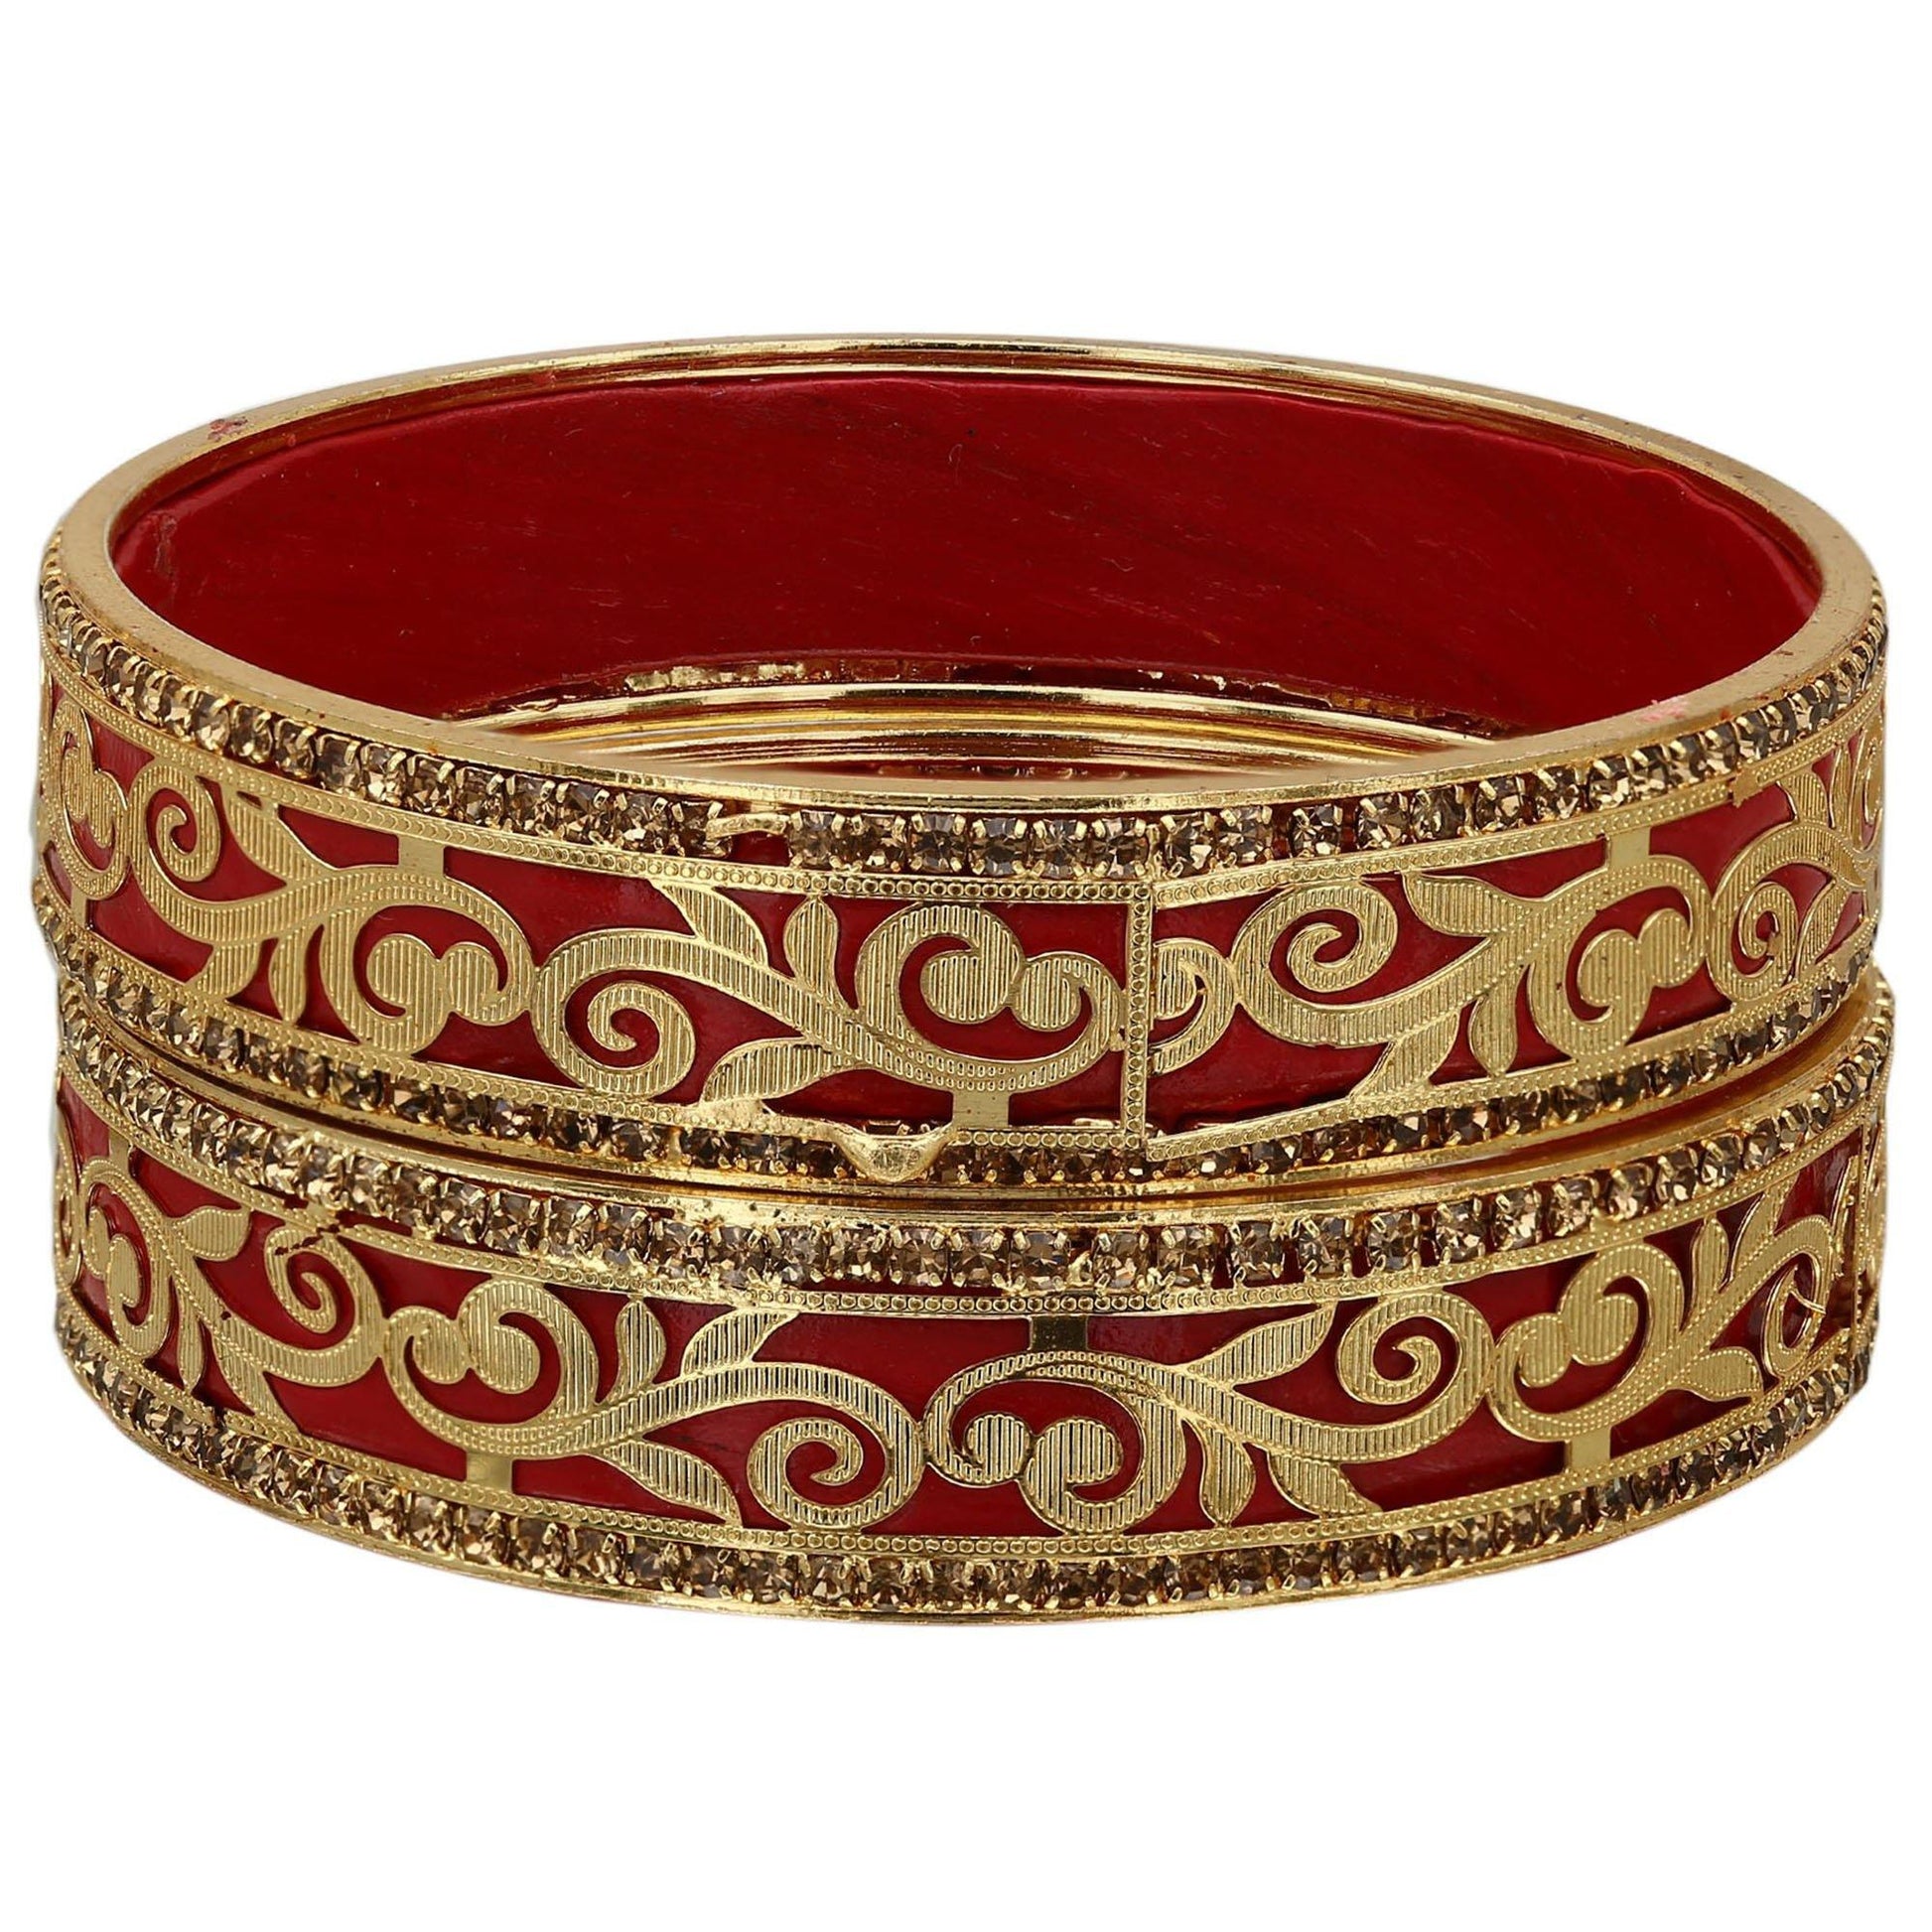 sukriti traditional rajasthani lac kada bangles with brass carving for women – set of 2